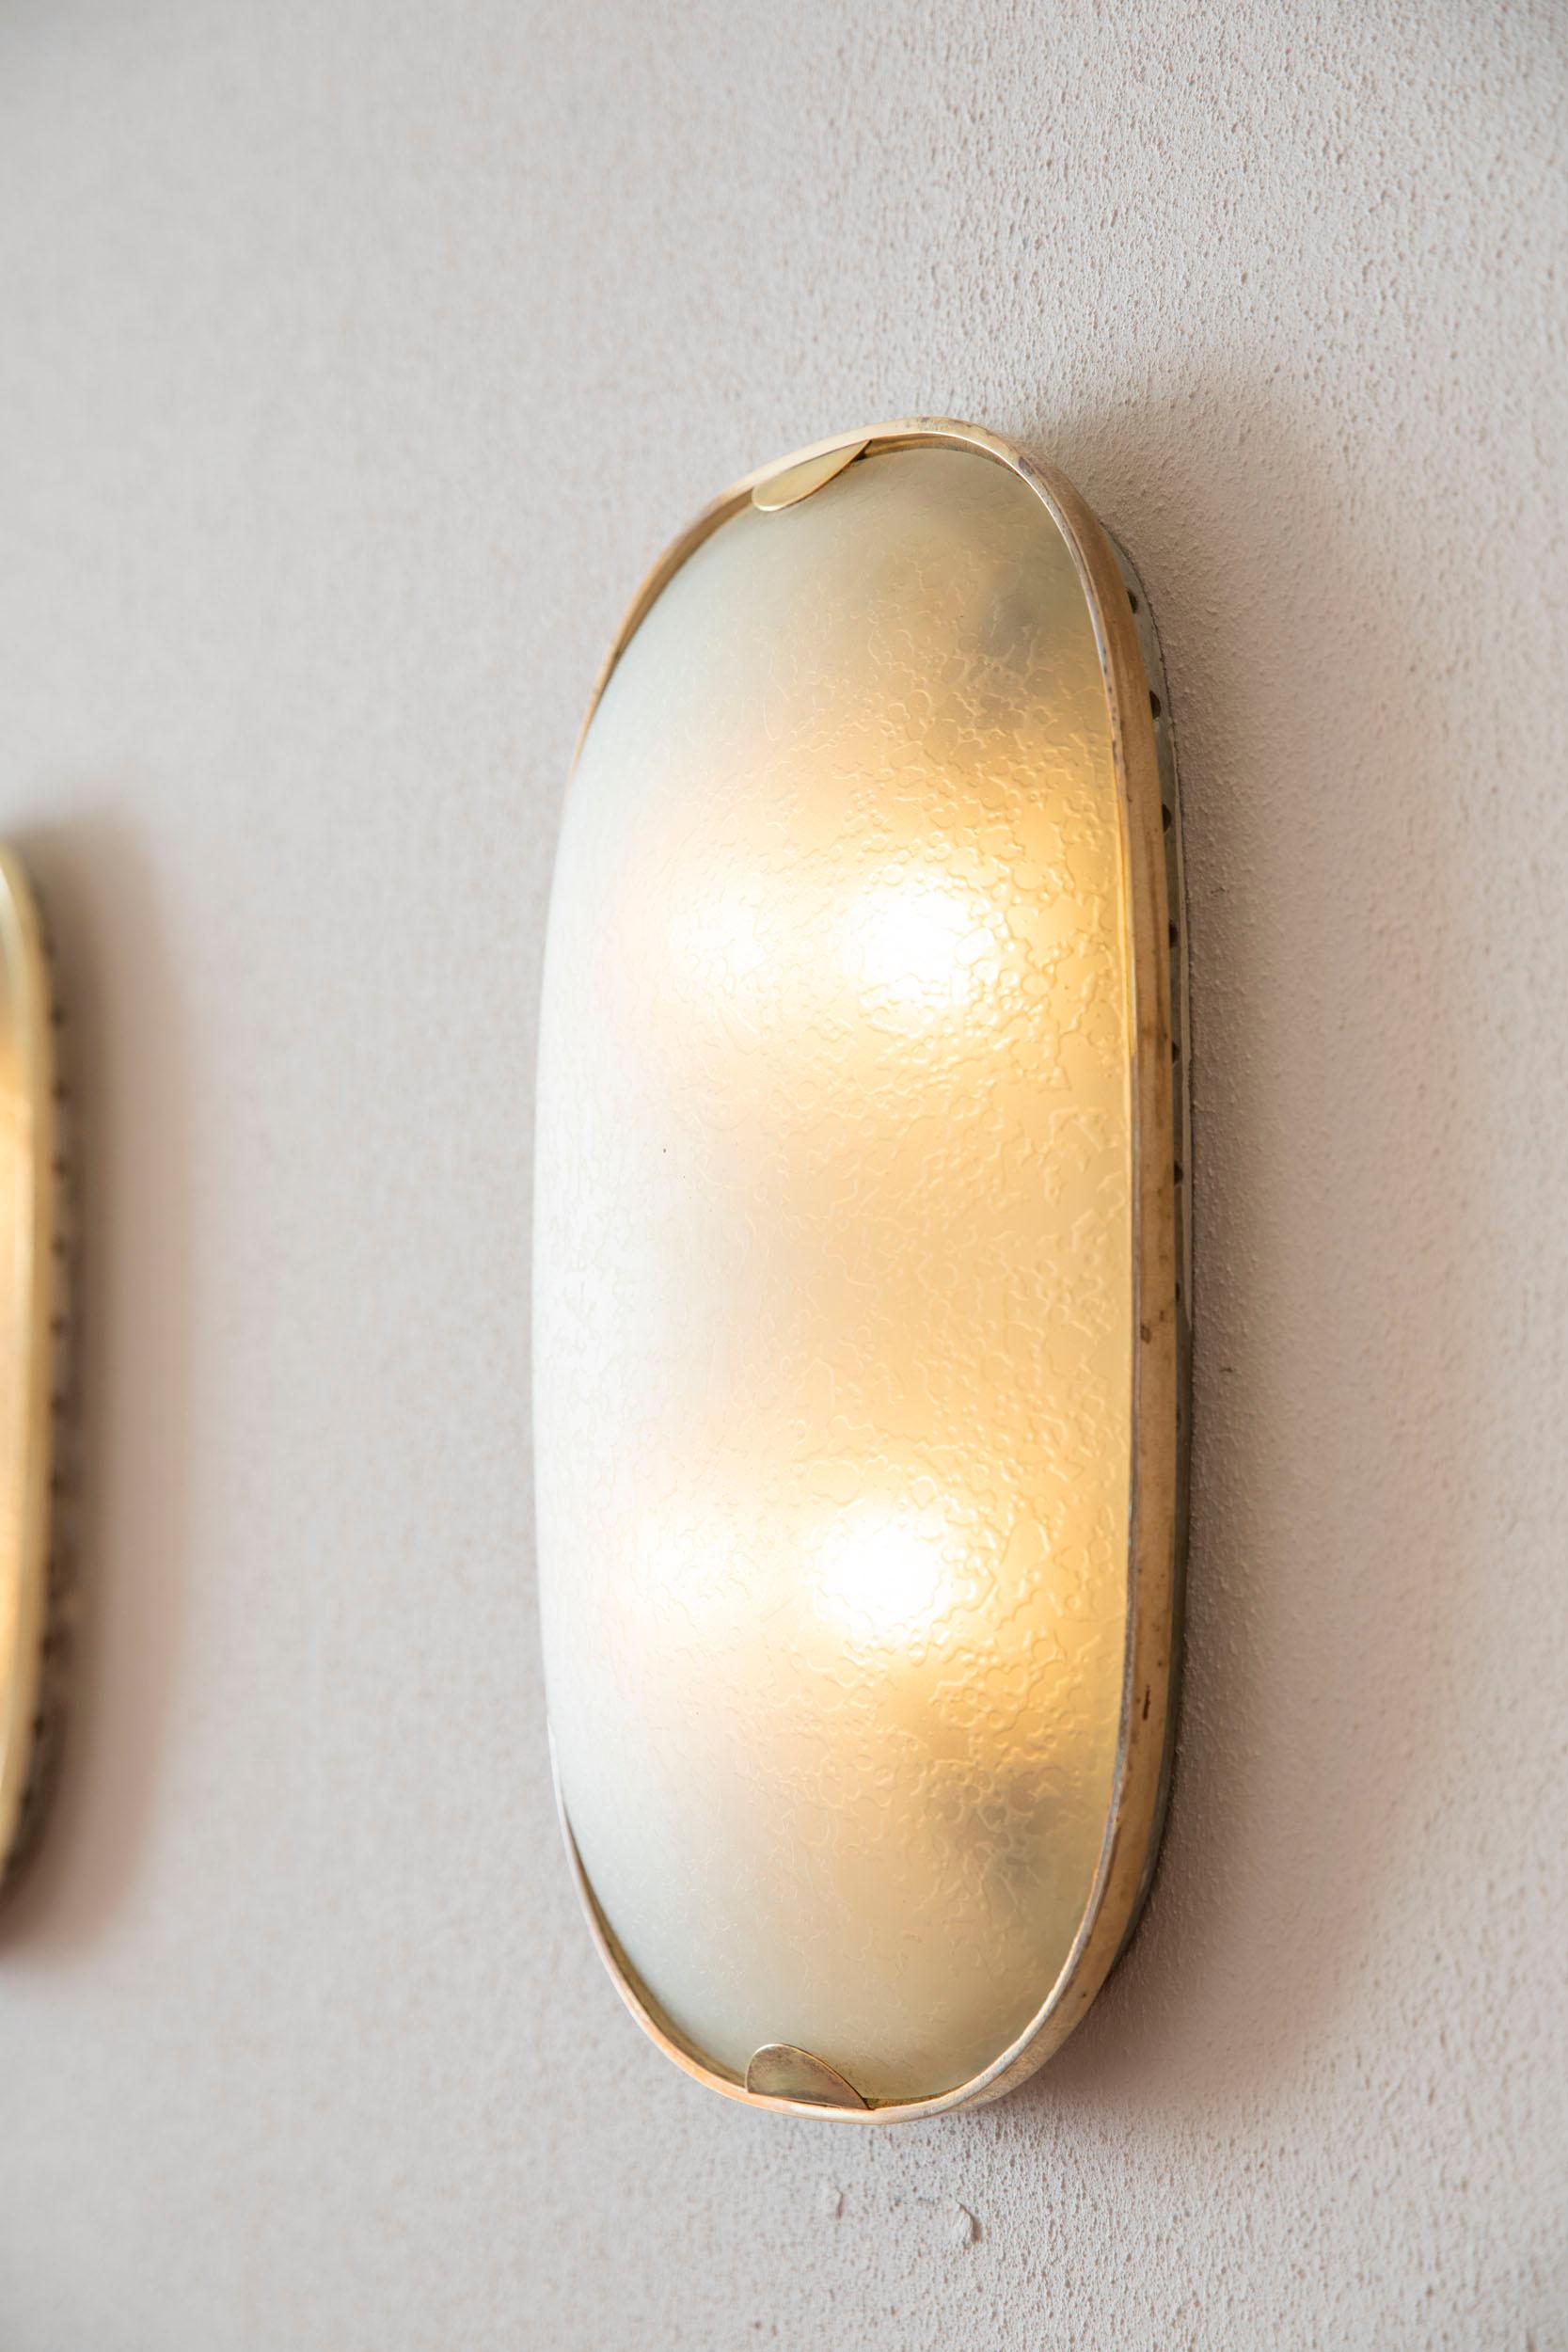 Stunning set of 3 wall lights by Fontana Arte.
Brass and glass oval sconces, you can use as flushmounts.
Four lights each.
Pressing a button you can easily open the sconce.
Excellent vintage condition.